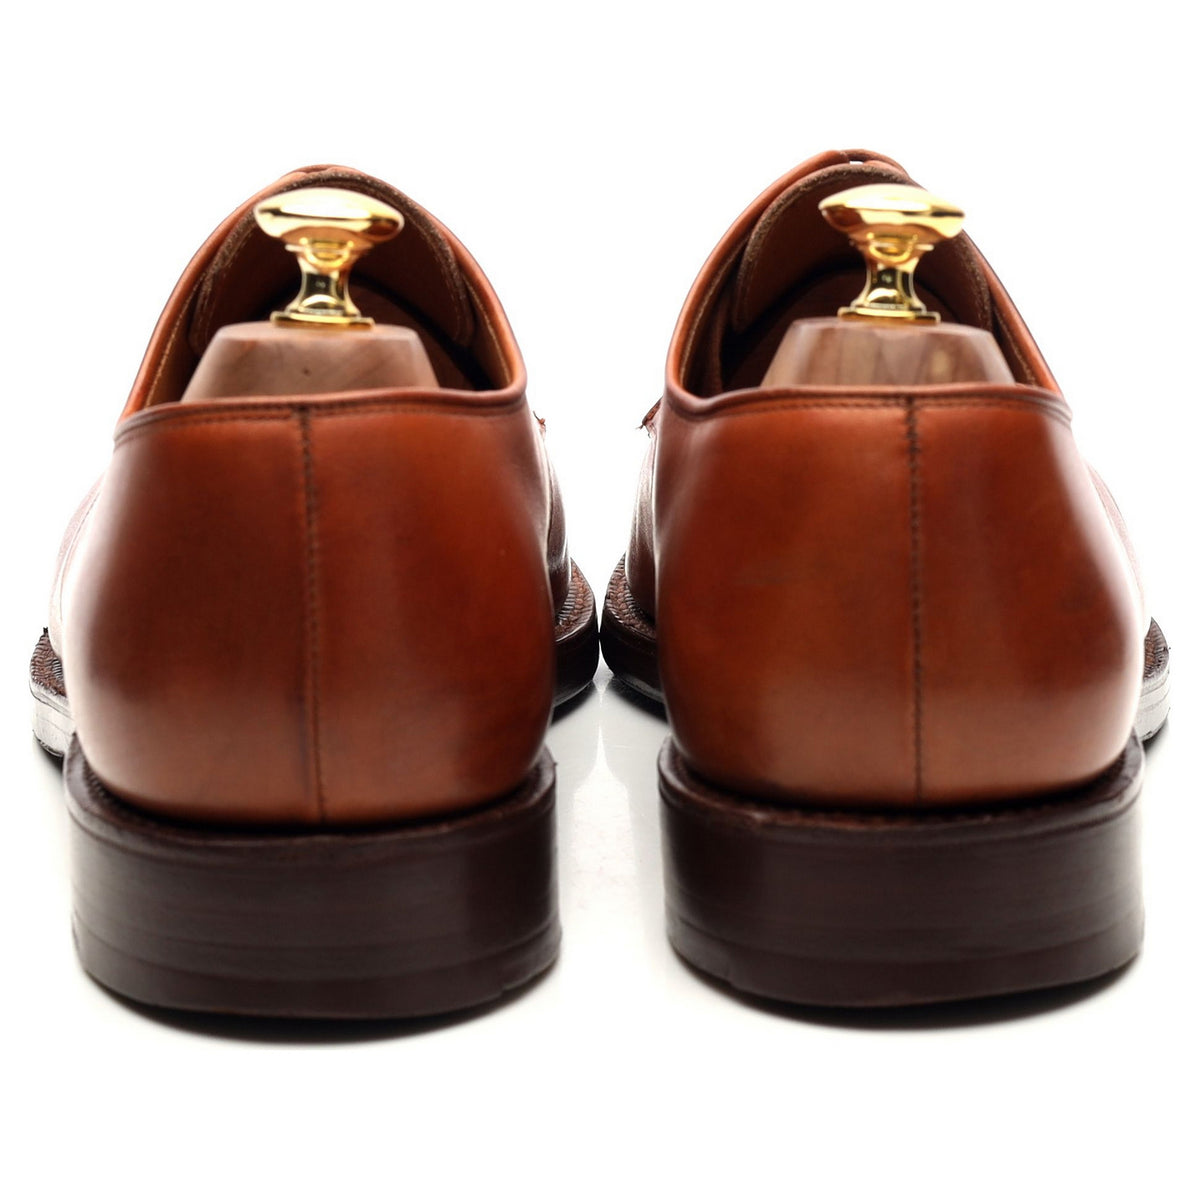 &#39;Bolton&#39; Tan Brown Leather Derby UK 10.5 E